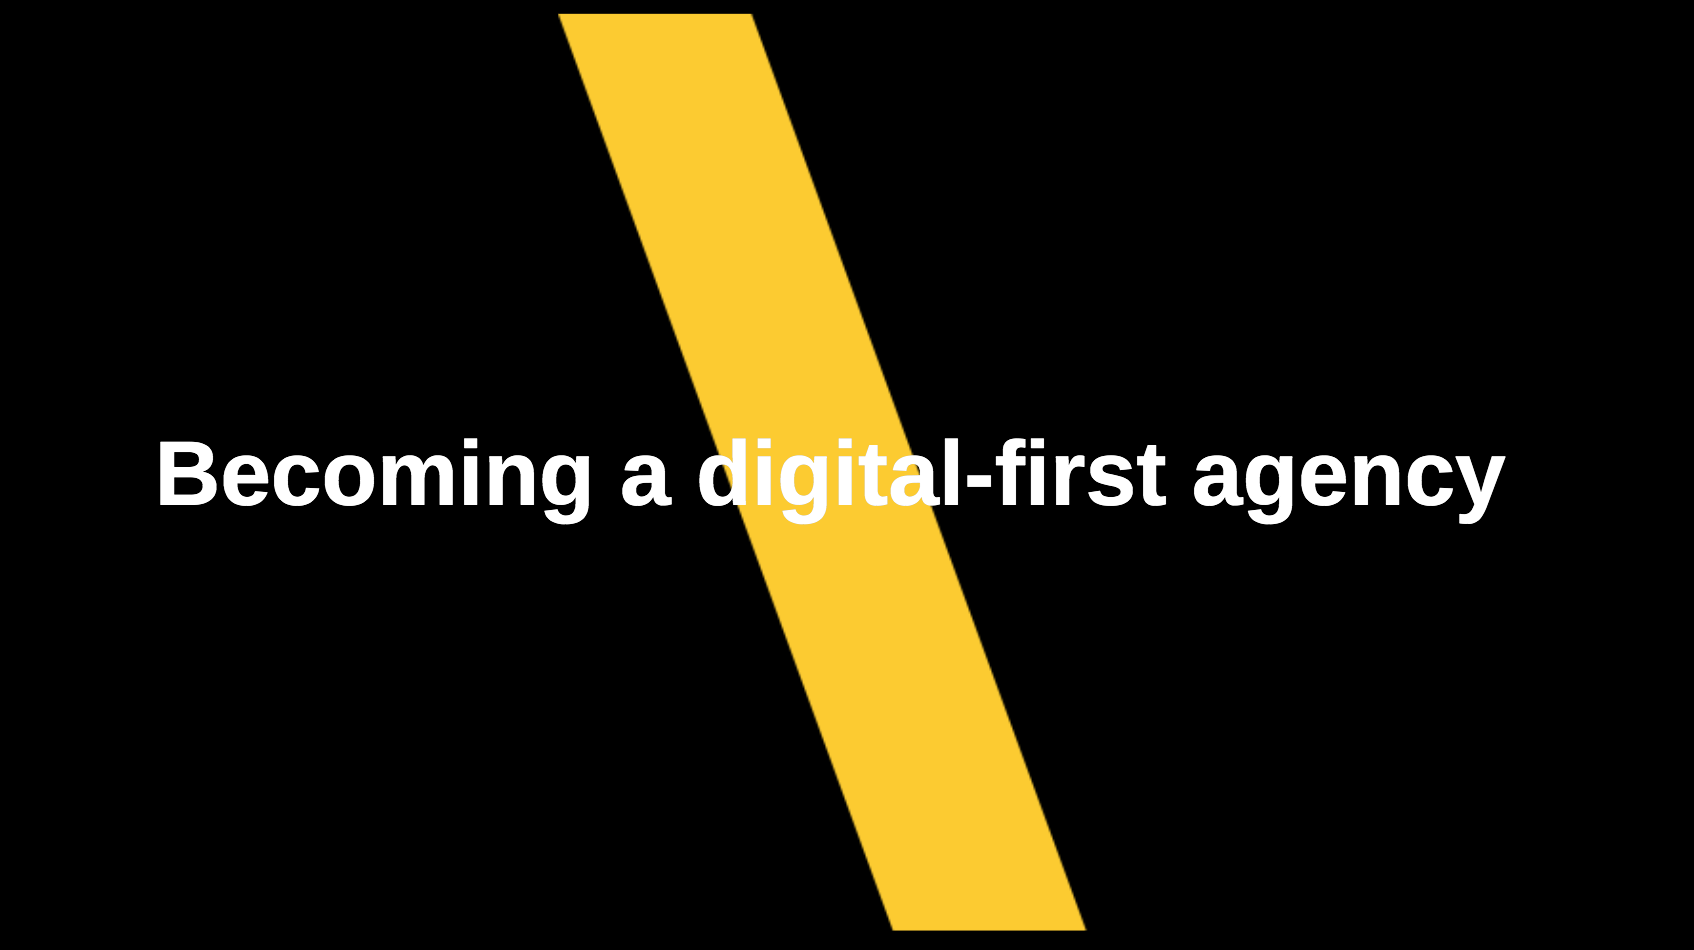 Becoming a digital-first agency